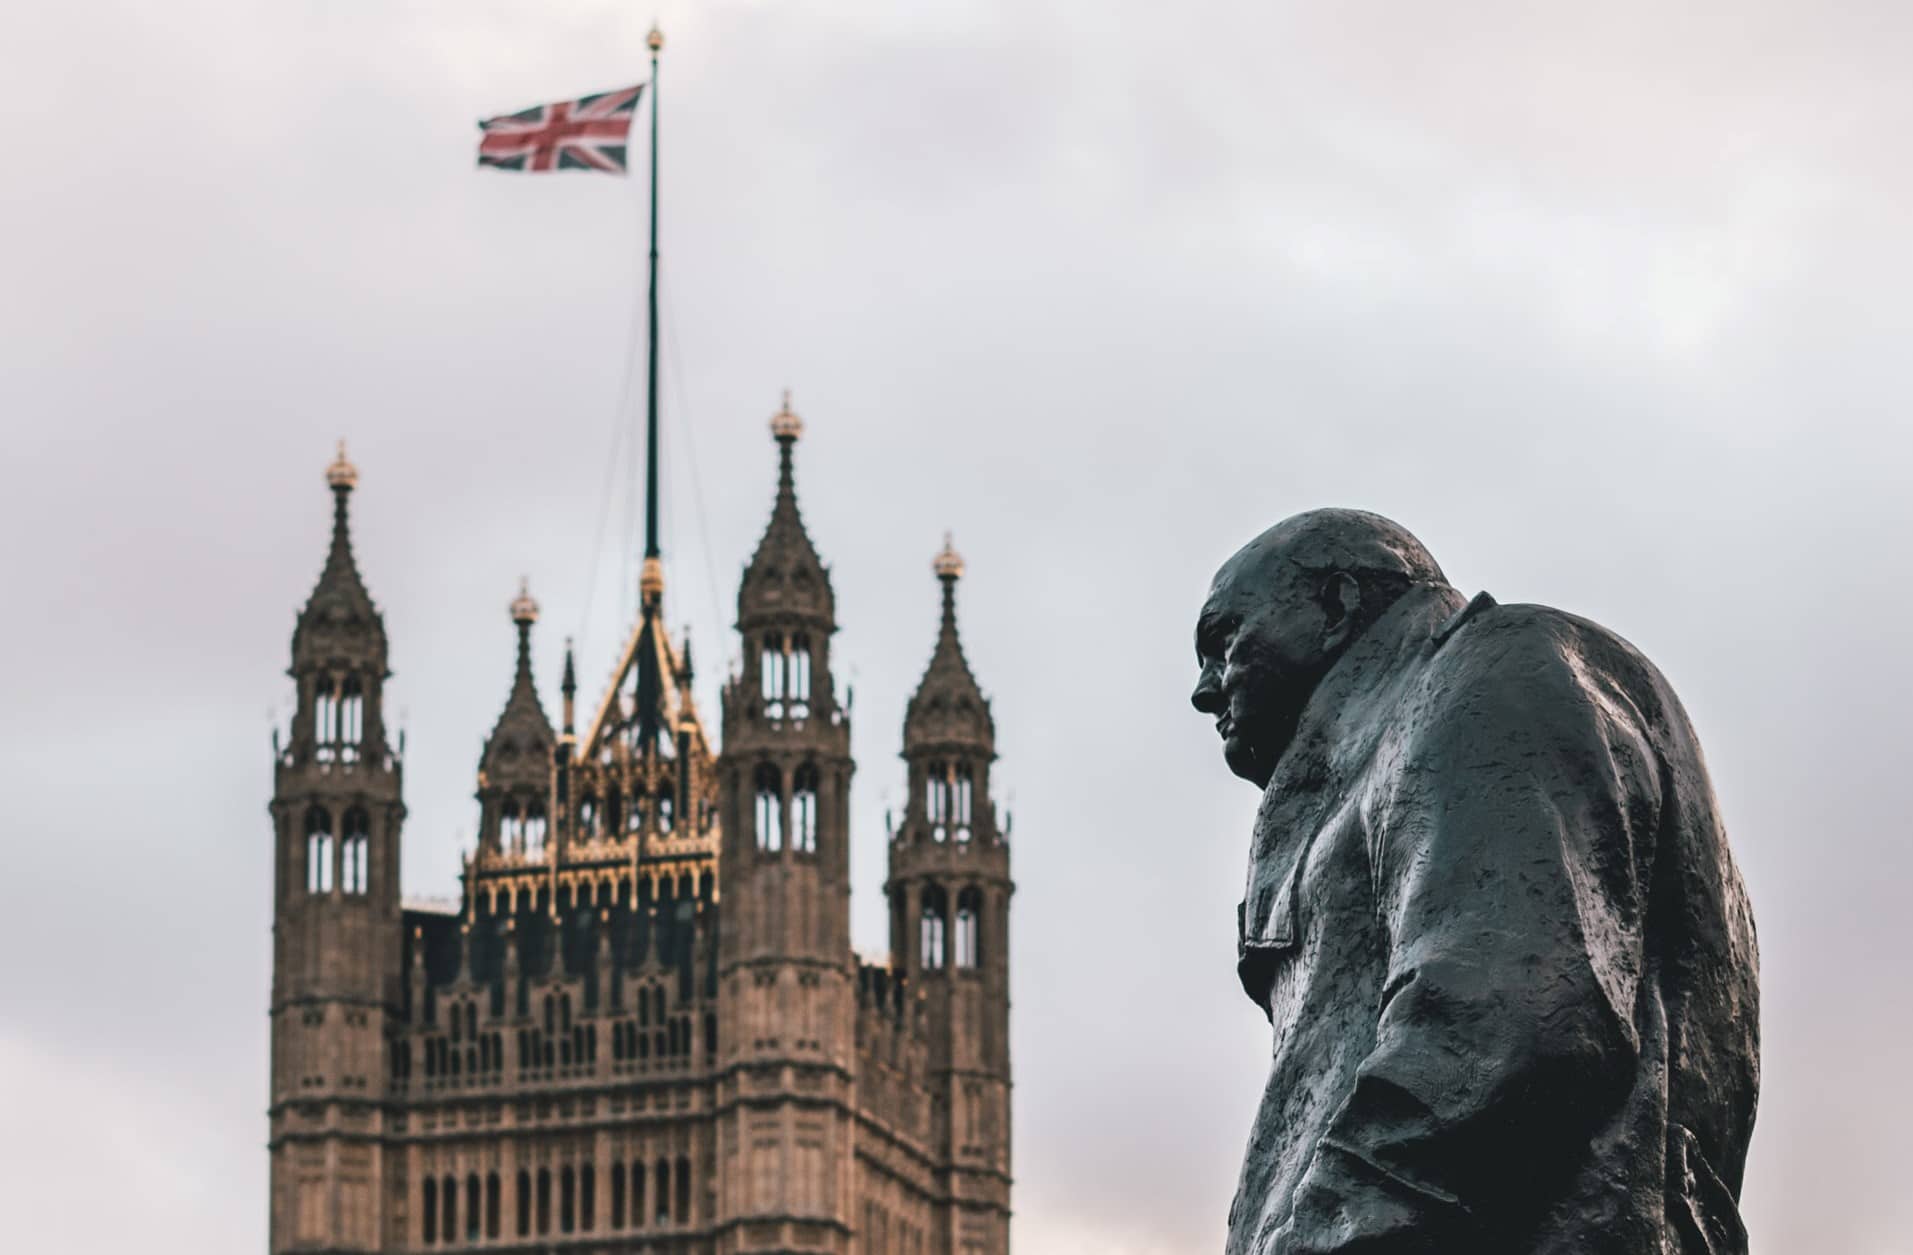 Statue of Winston Churchill in Westminster, London.